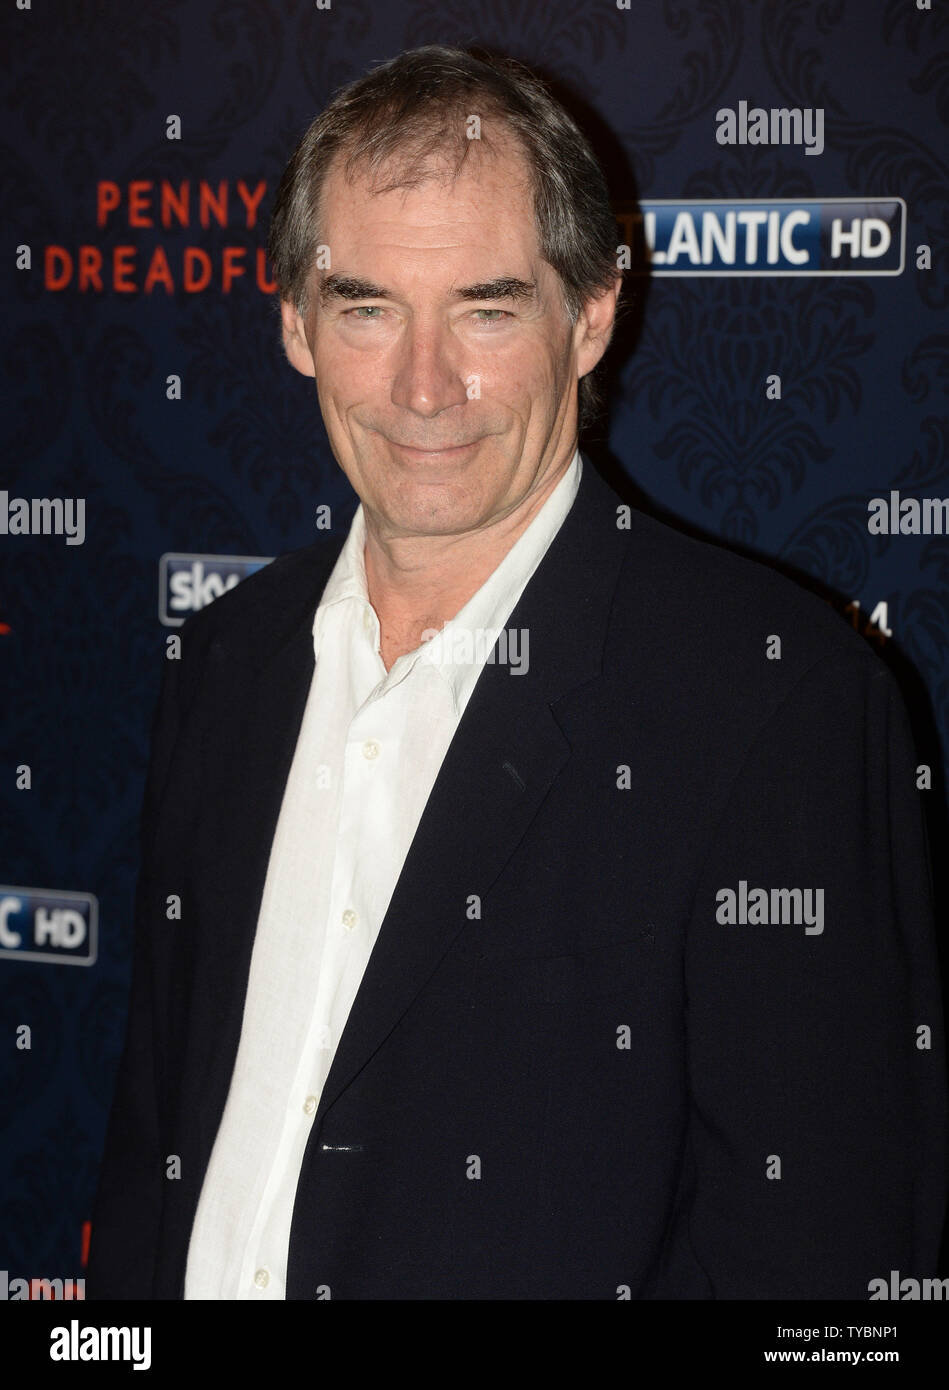 British actor Timothy Dalton attends the premiere of 'Penny Dreadful' at the Renaissance Hotel in London on May 12, 2014.     UPI/ Rune Hellestad Stock Photo